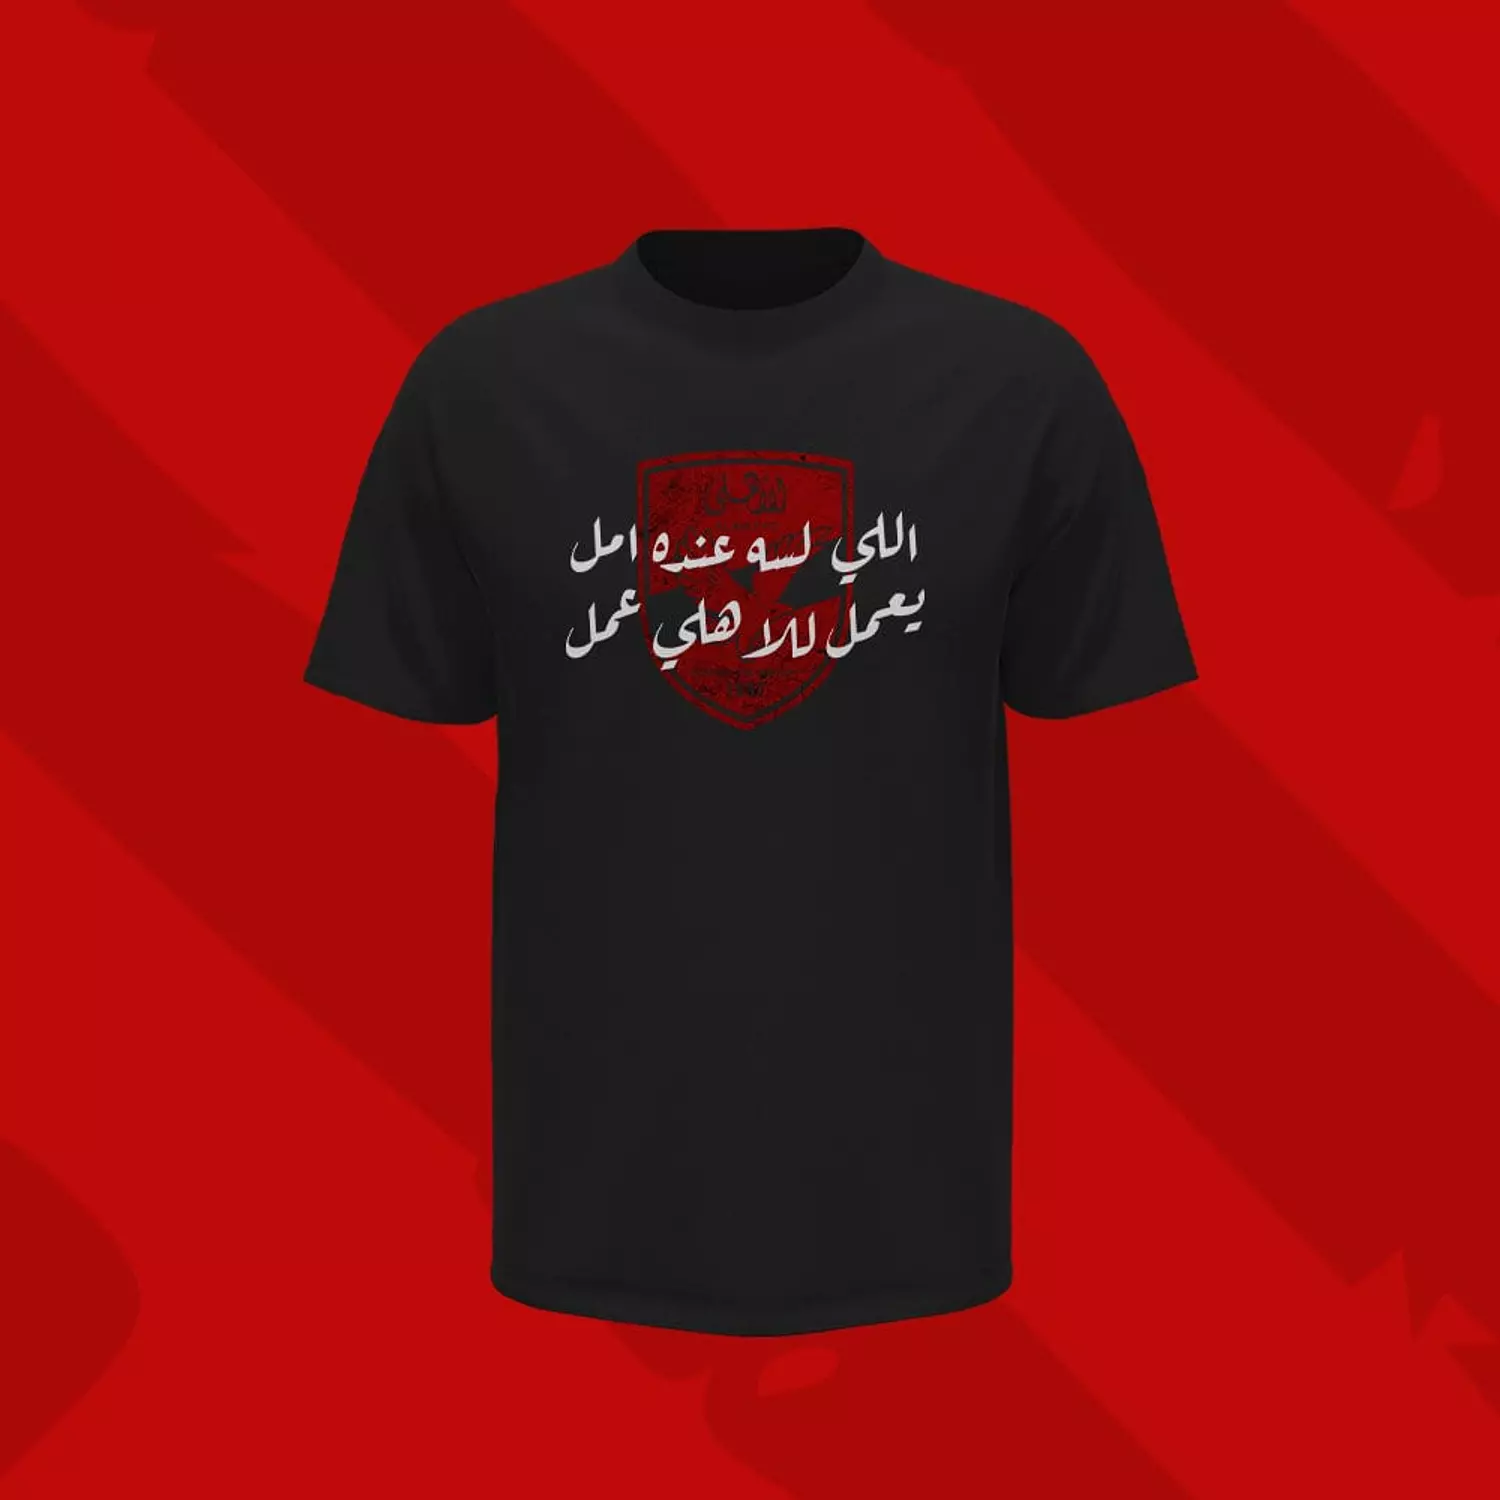 Y3ml ll-Ahly 3aml T shirt hover image